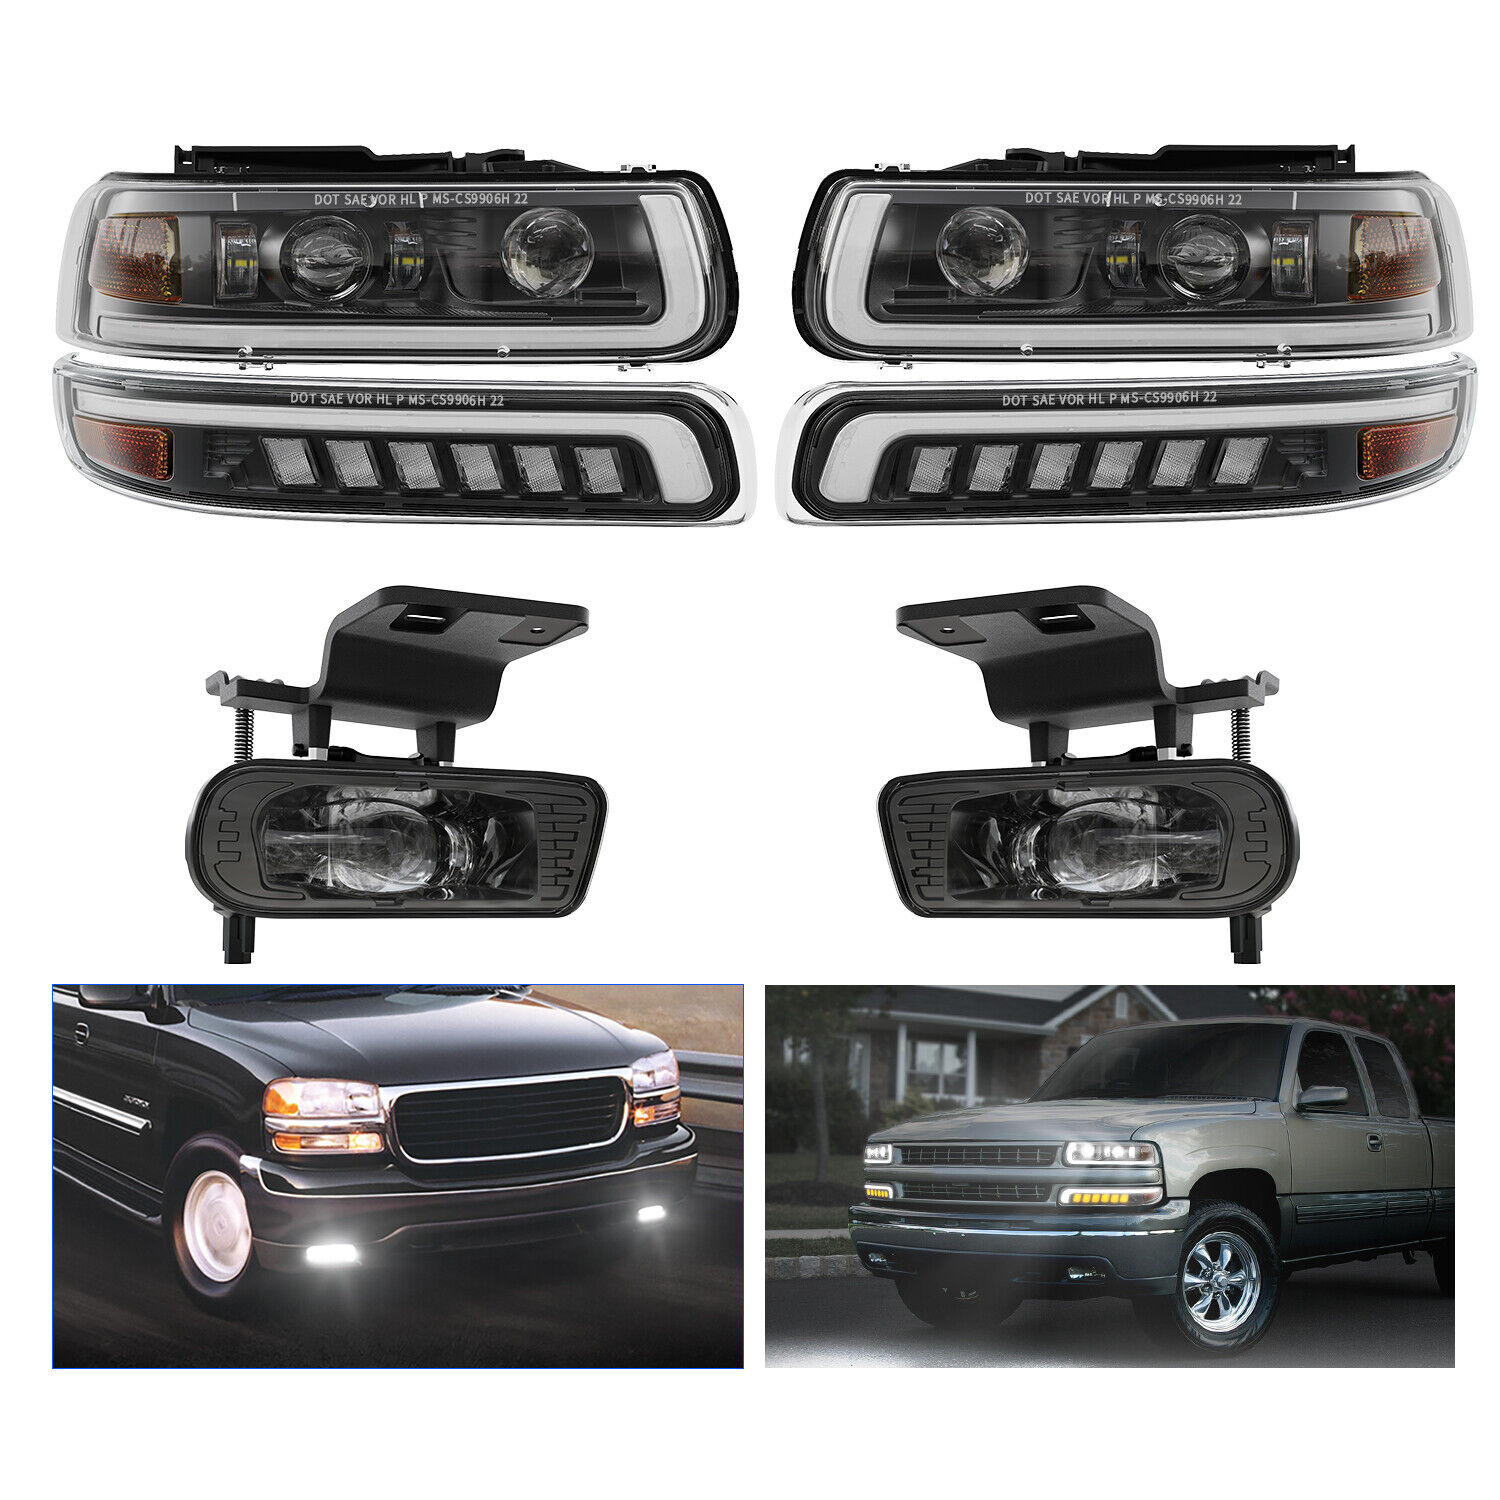 Fit For 99-02 Chevy Silverado 00-06 Tahoe DRL LED Headlights Lamps + Fog Lights